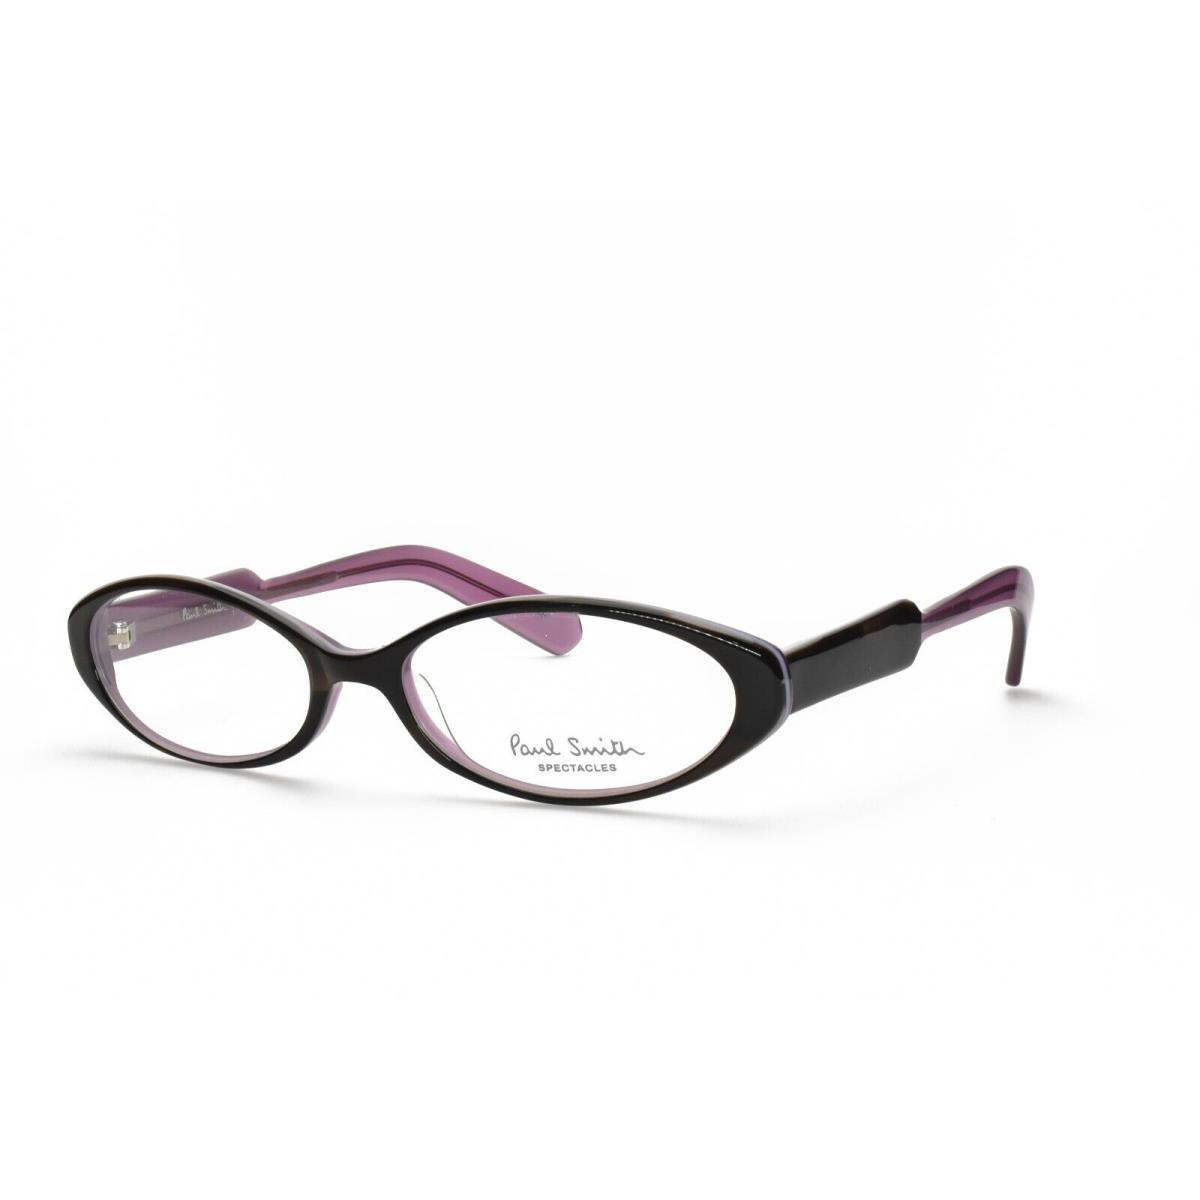 Paul Smith PS 296 Bhpl Eyeglasses Frames Only 52-17-135